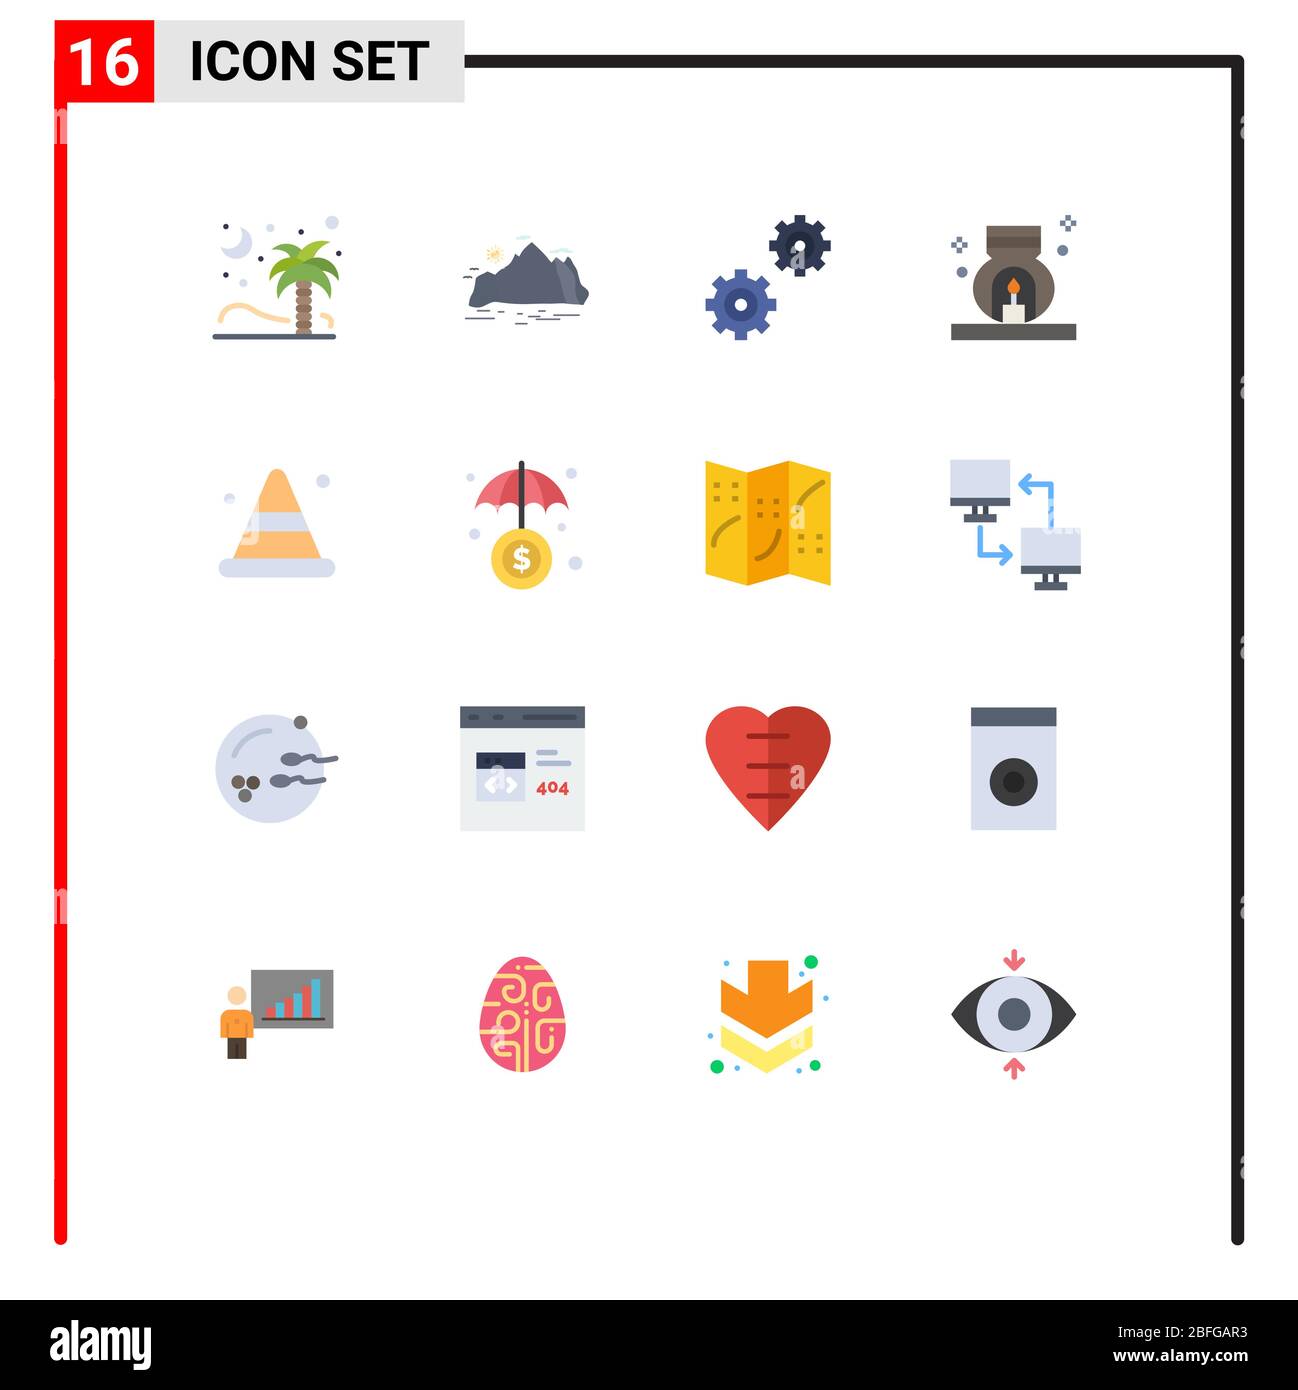 Universal Icon Symbols Group of 16 Modern Flat Colors of alert, scent, mountain, relax, options Editable Pack of Creative Vector Design Elements Stock Vector